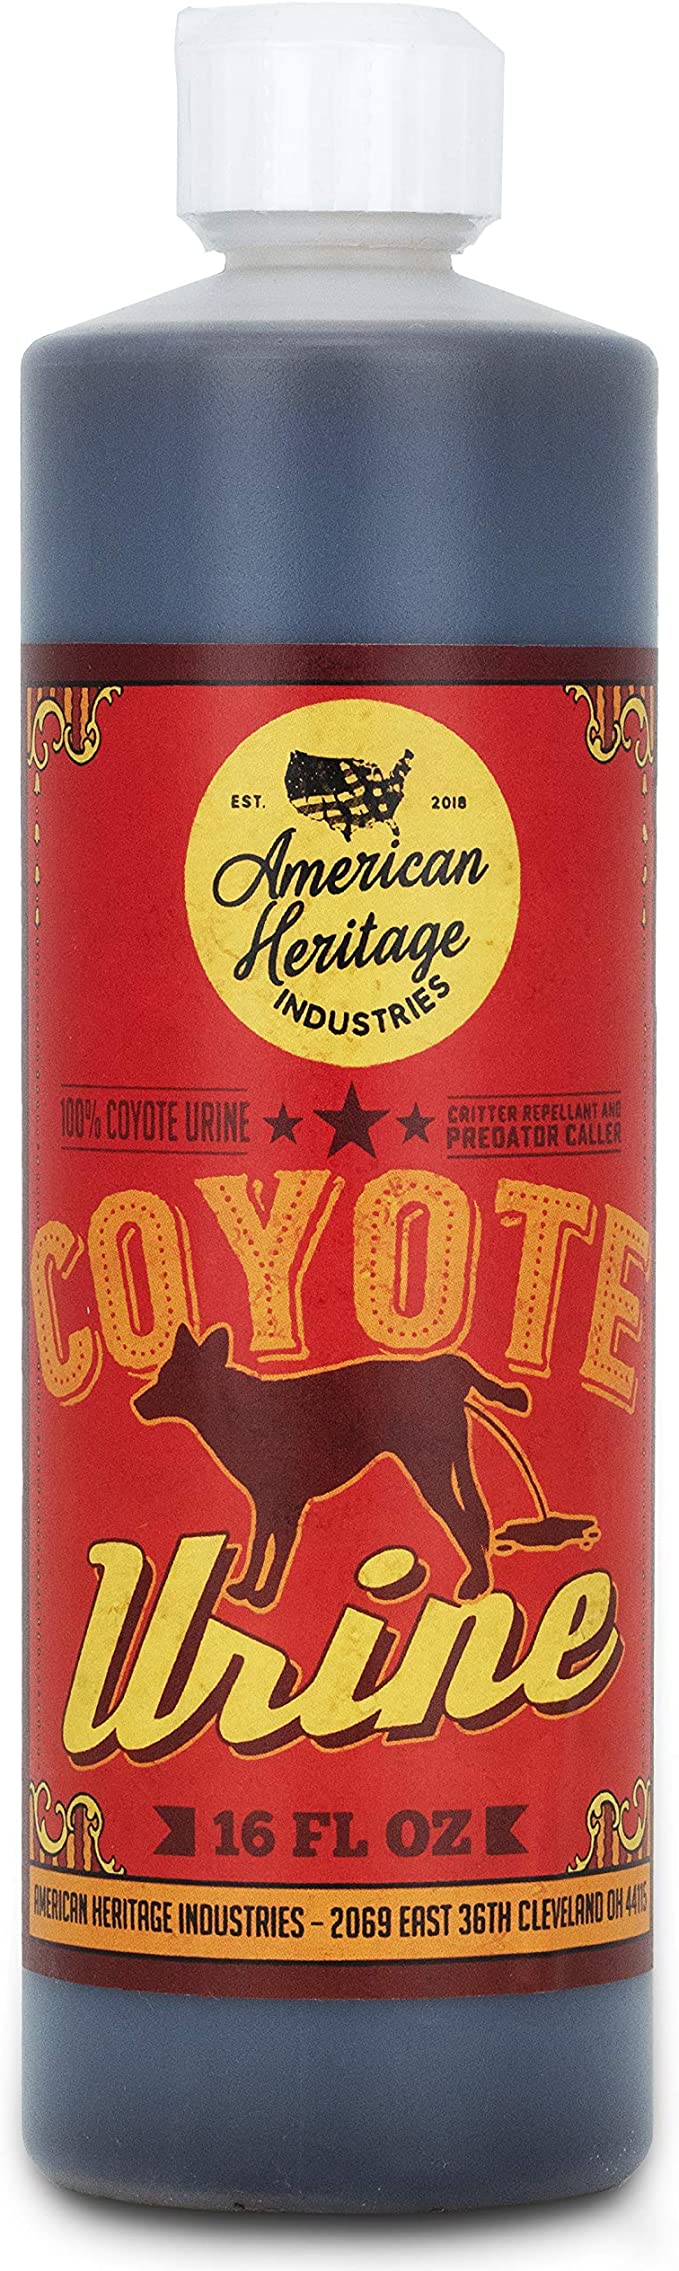 American Heritage Industries 16 oz Coyote Urine- Protect Your Garden with Real Predator Urine, an Product